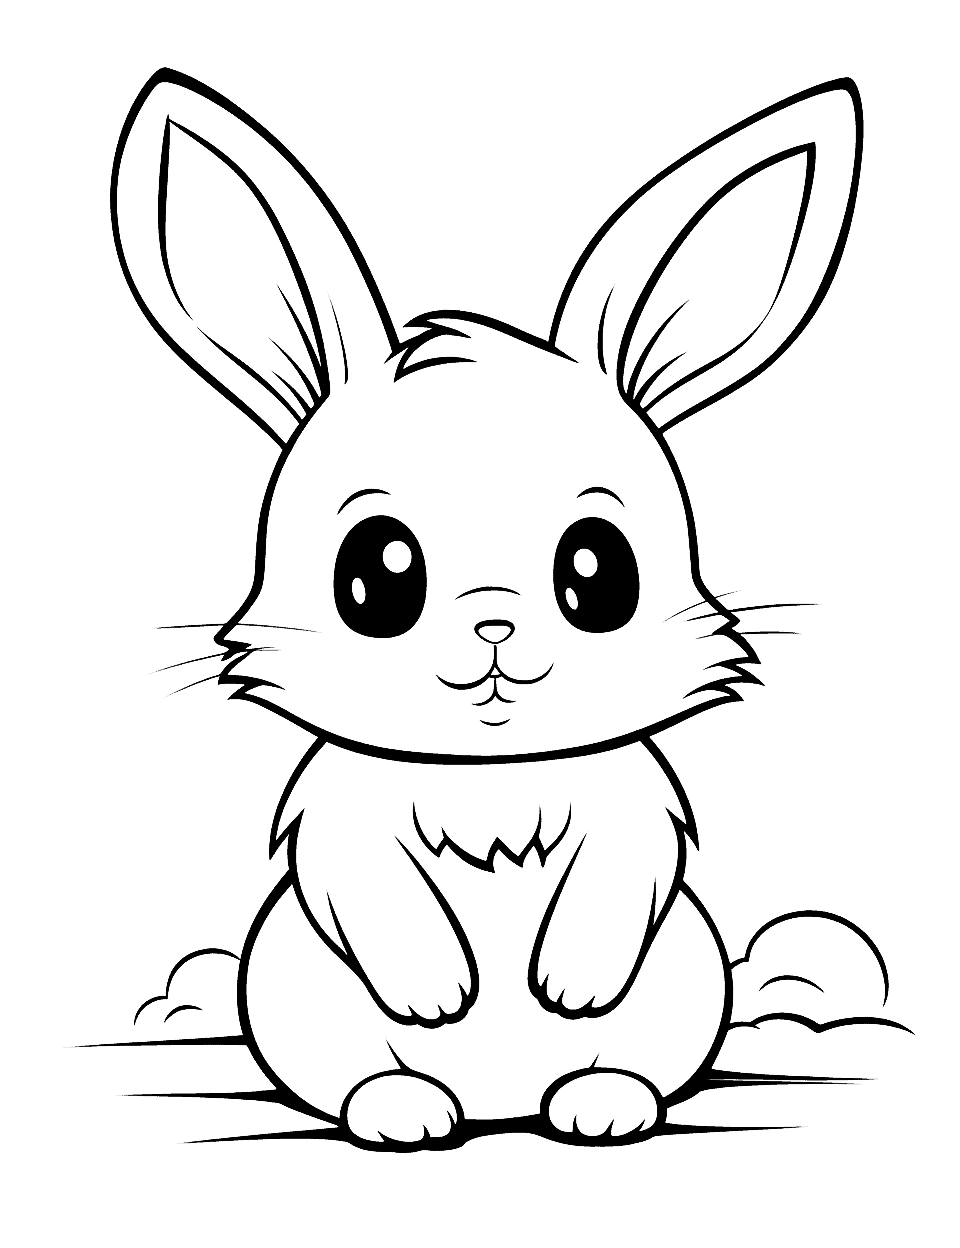 Chibi Bunny with Cheeks Puffed Coloring Page - An adorable Chibi-style bunny looking surprised with puffed cheeks.